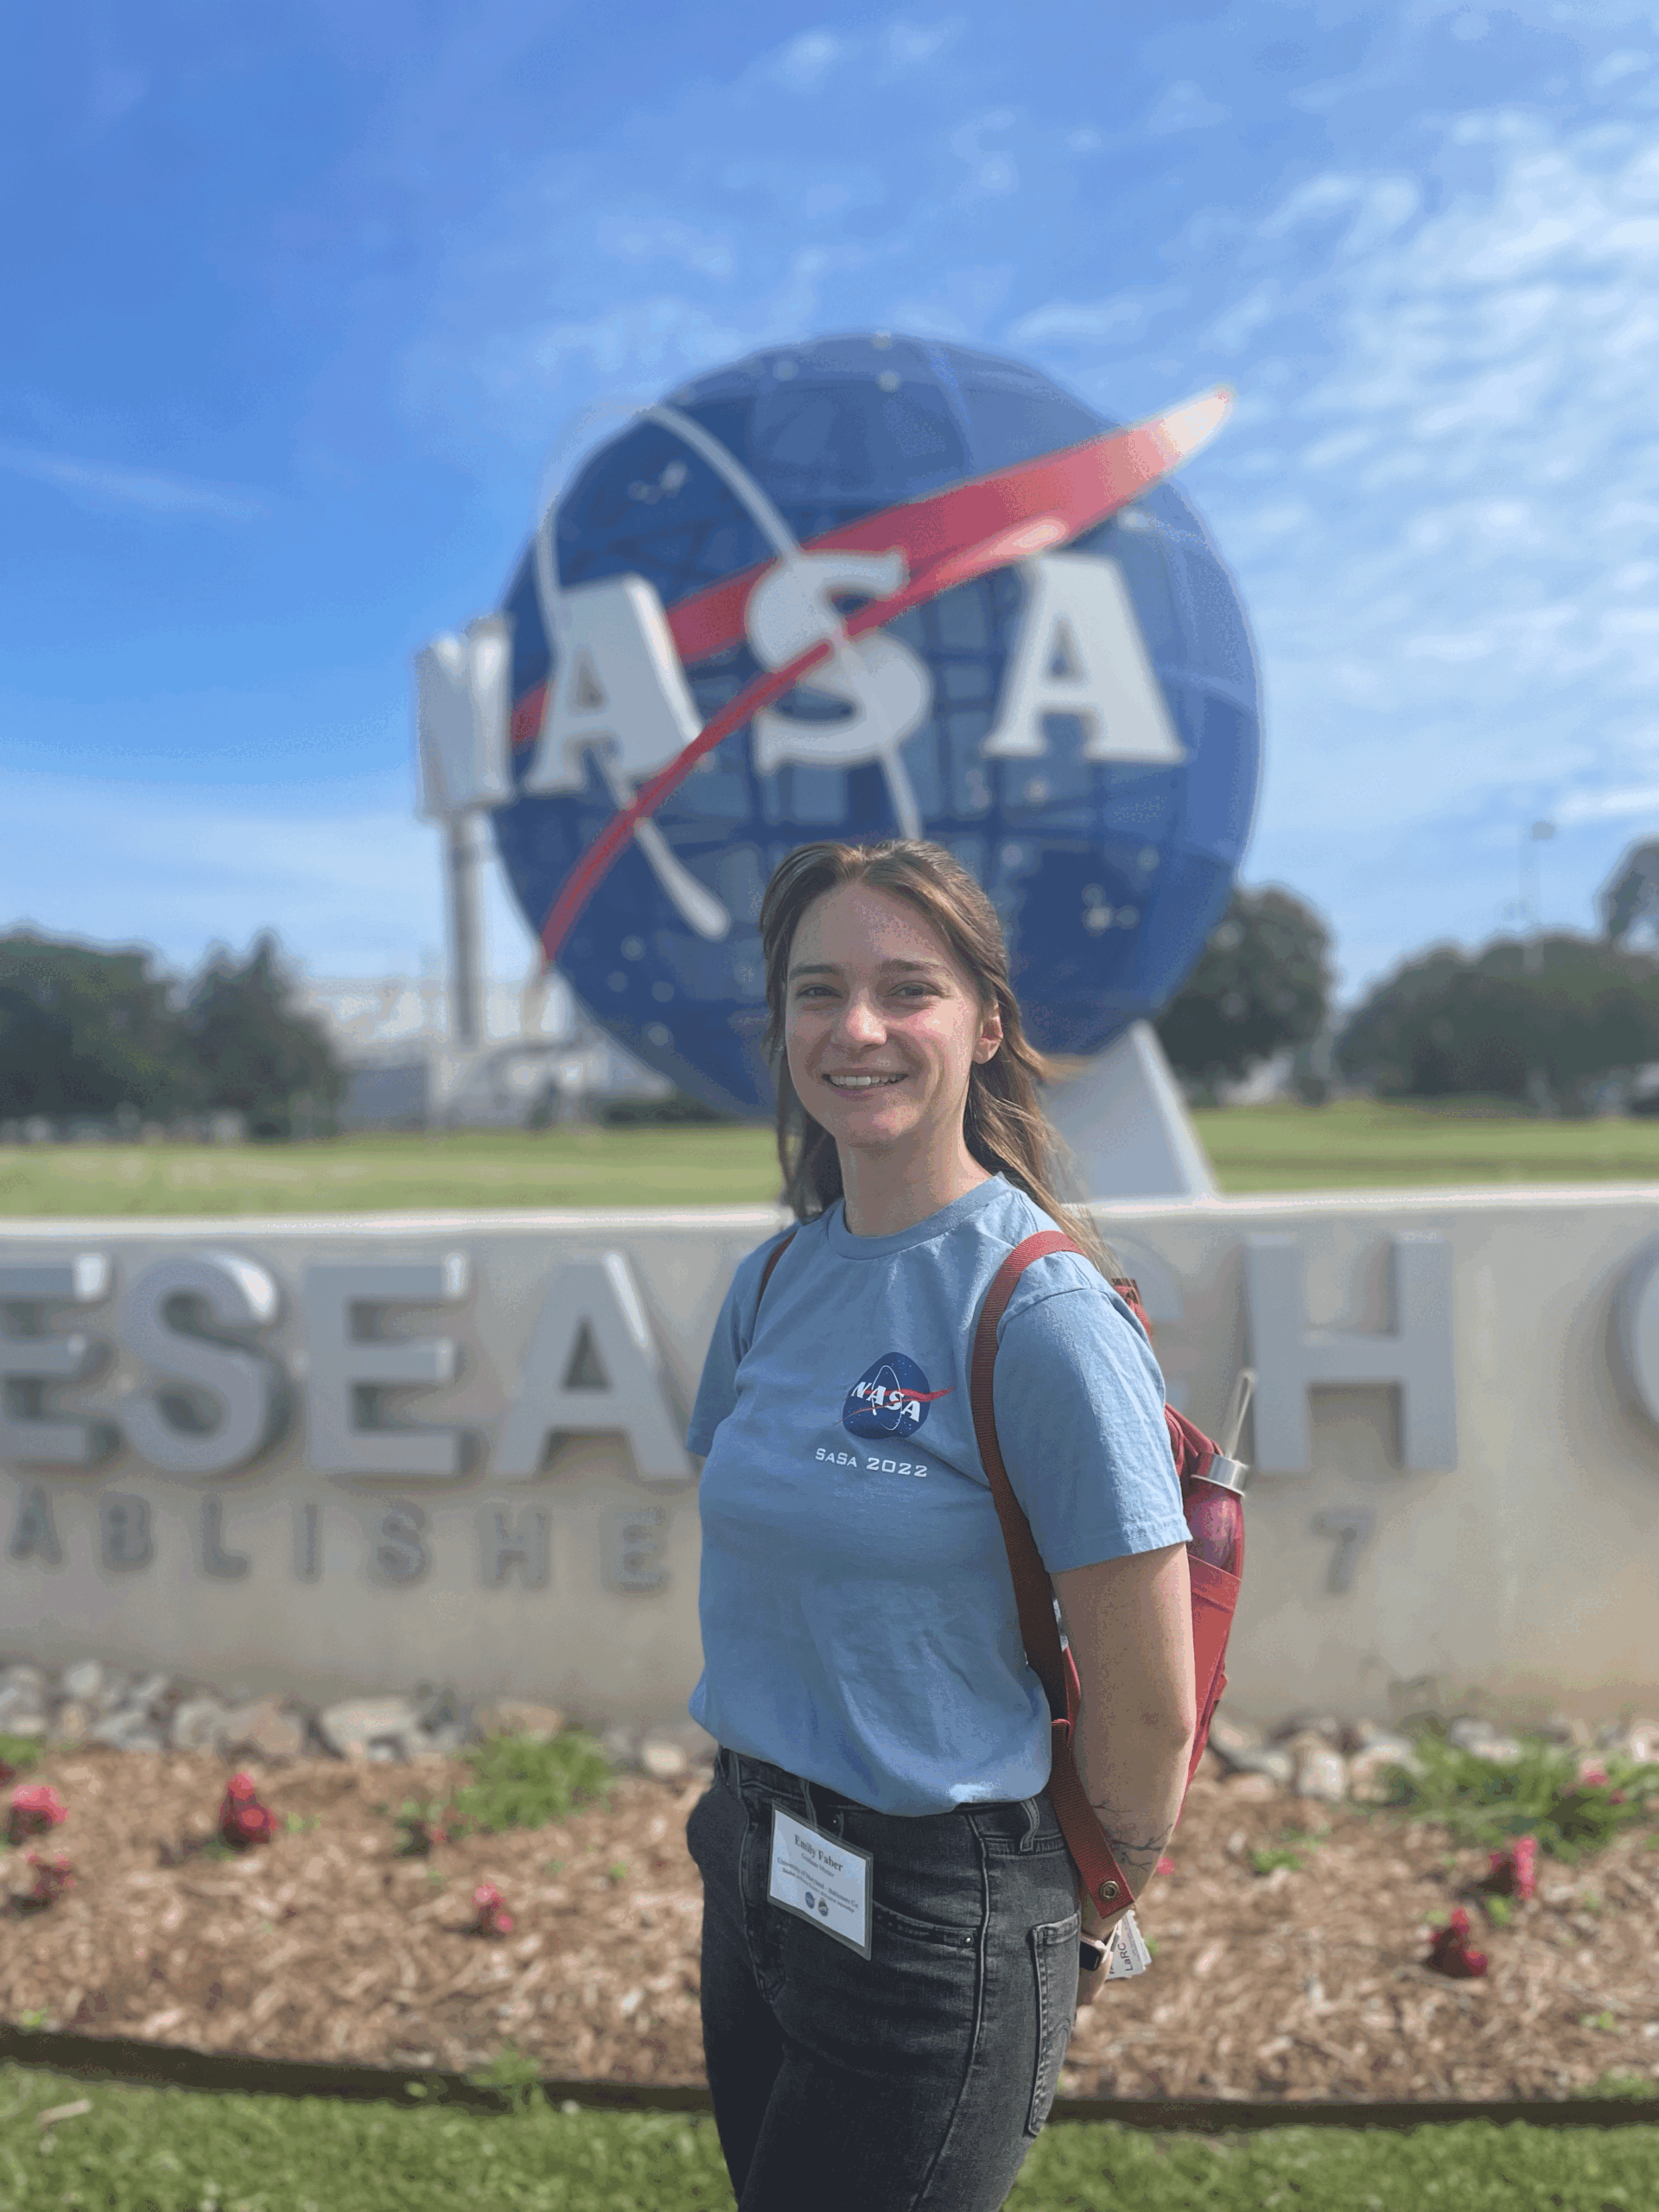 Meet a Retriever – Emily Faber, Ph.D. student in atmospheric physics